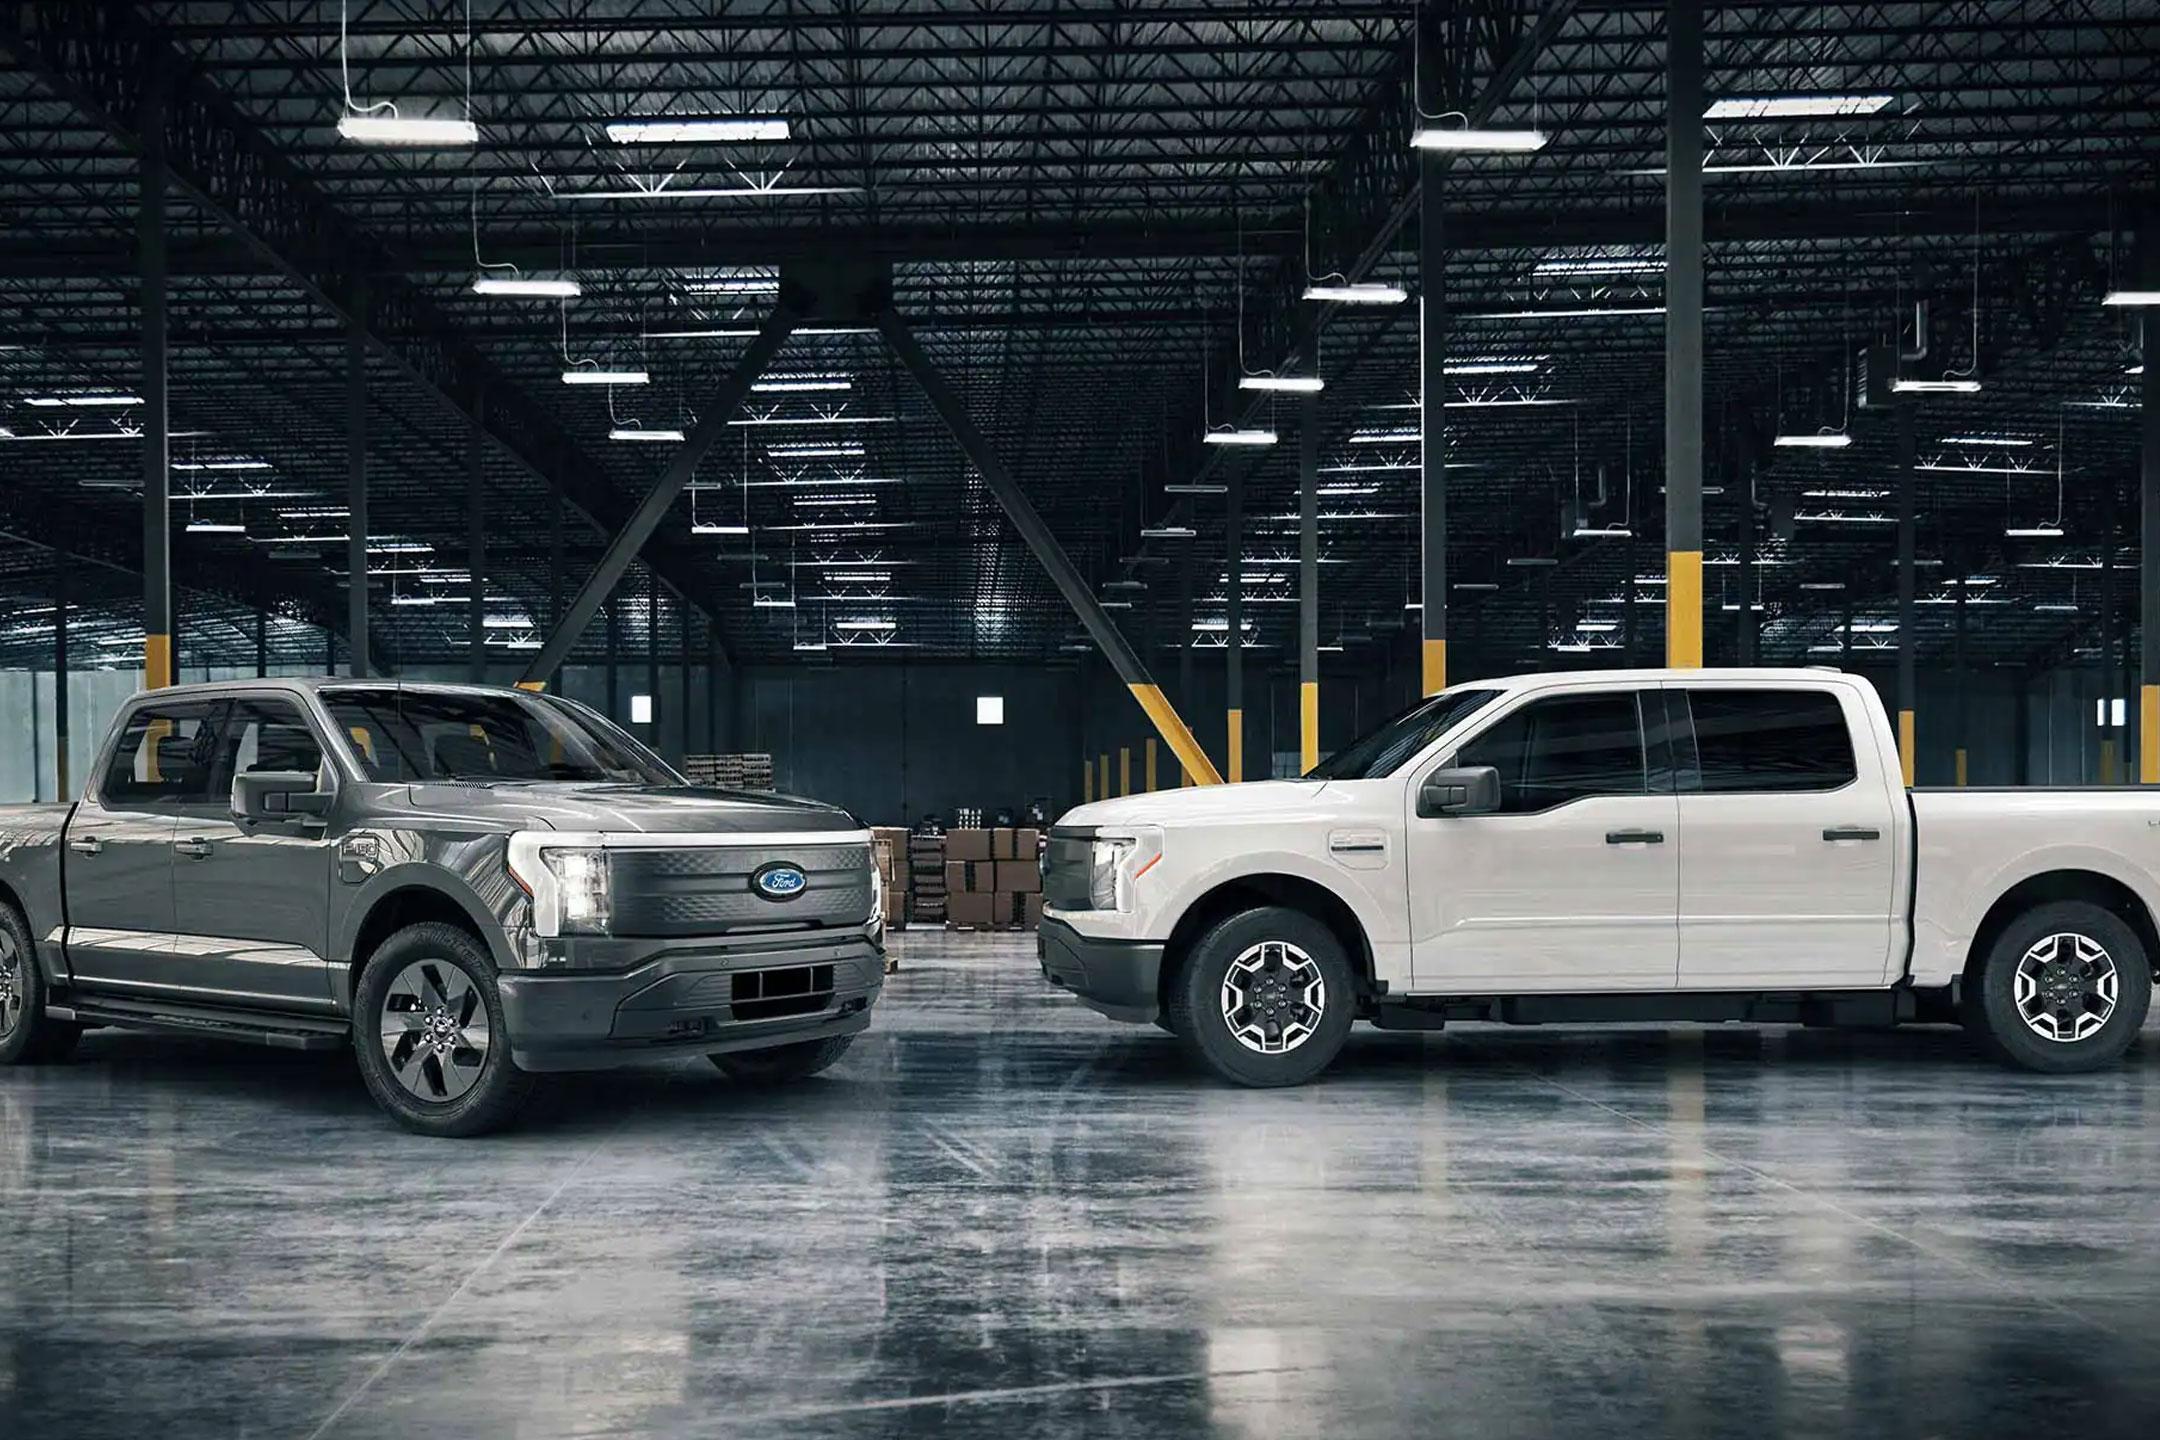 Two 2022 Ford F-150 Lightning trucks in a warehouse